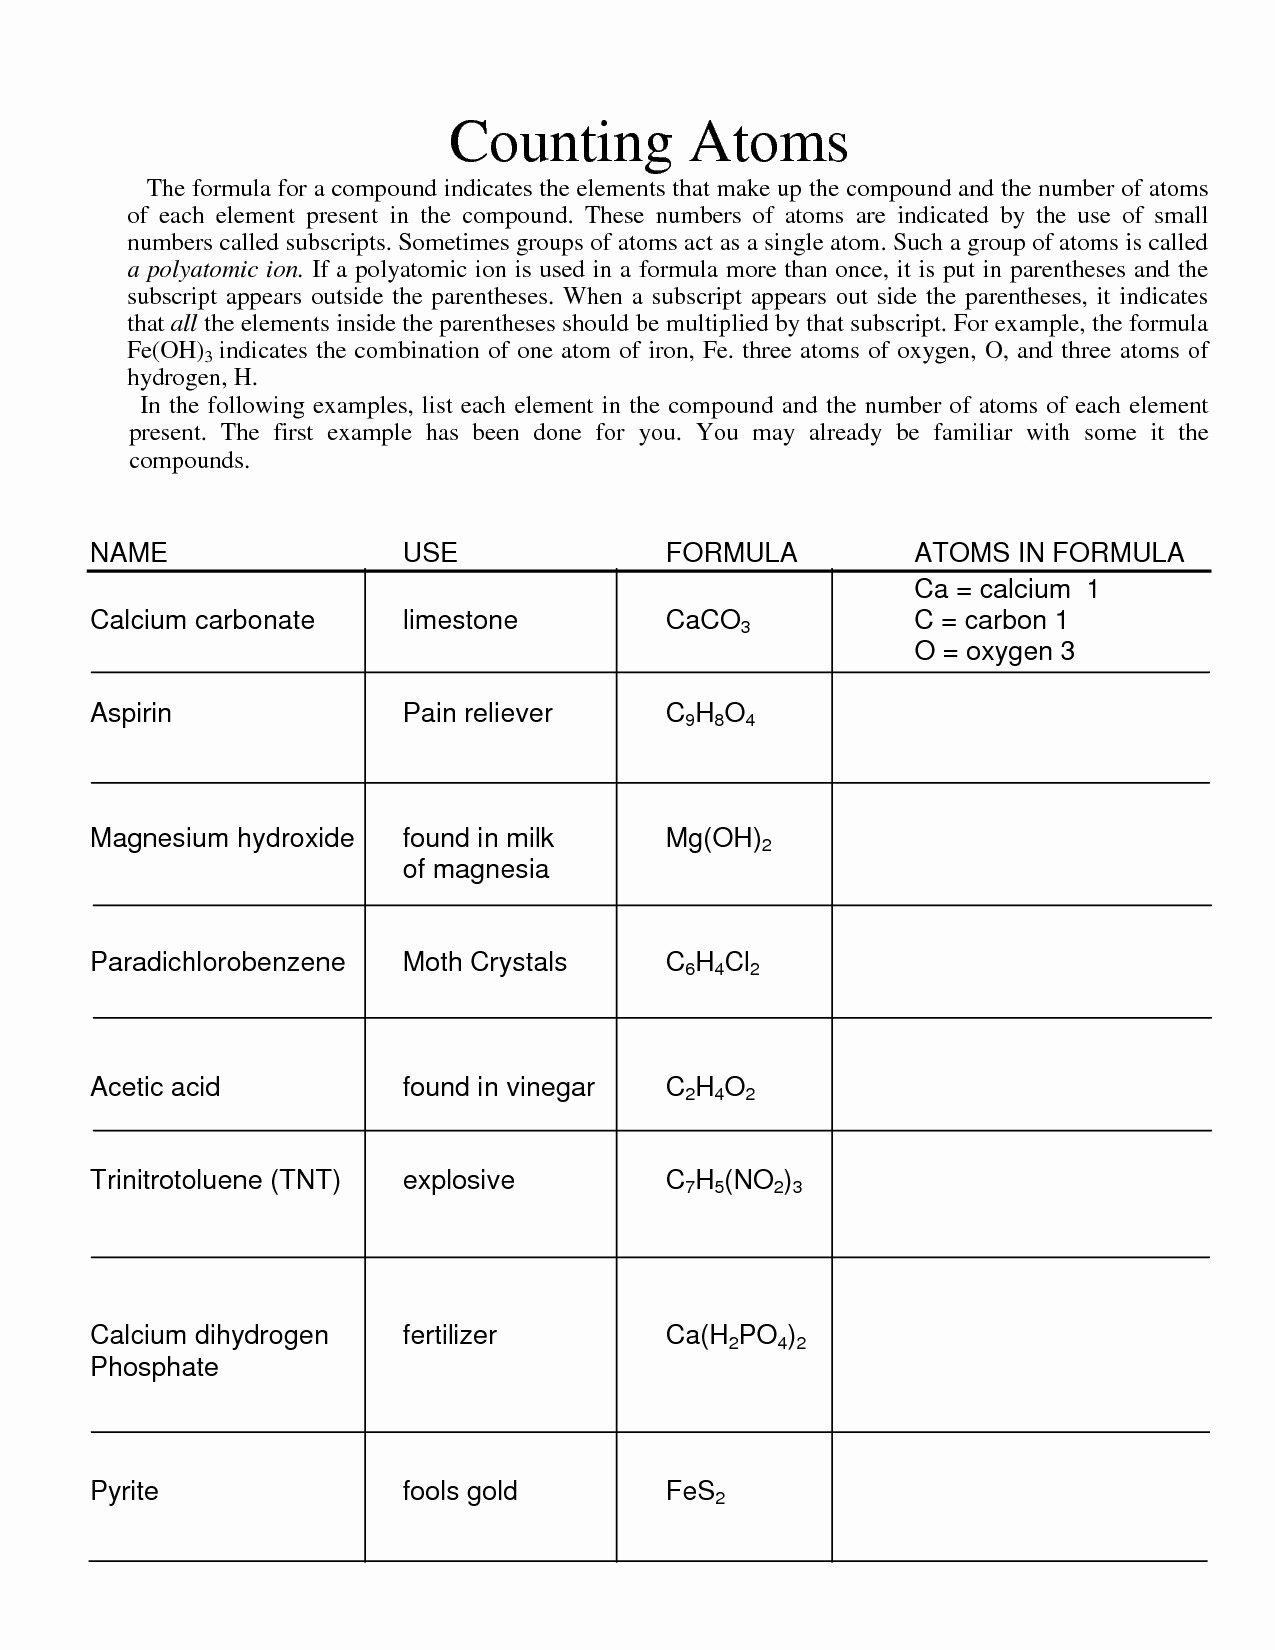 Atoms and Ions Worksheet Answers Fresh 17 Best Of Counting atoms Worksheet Answers